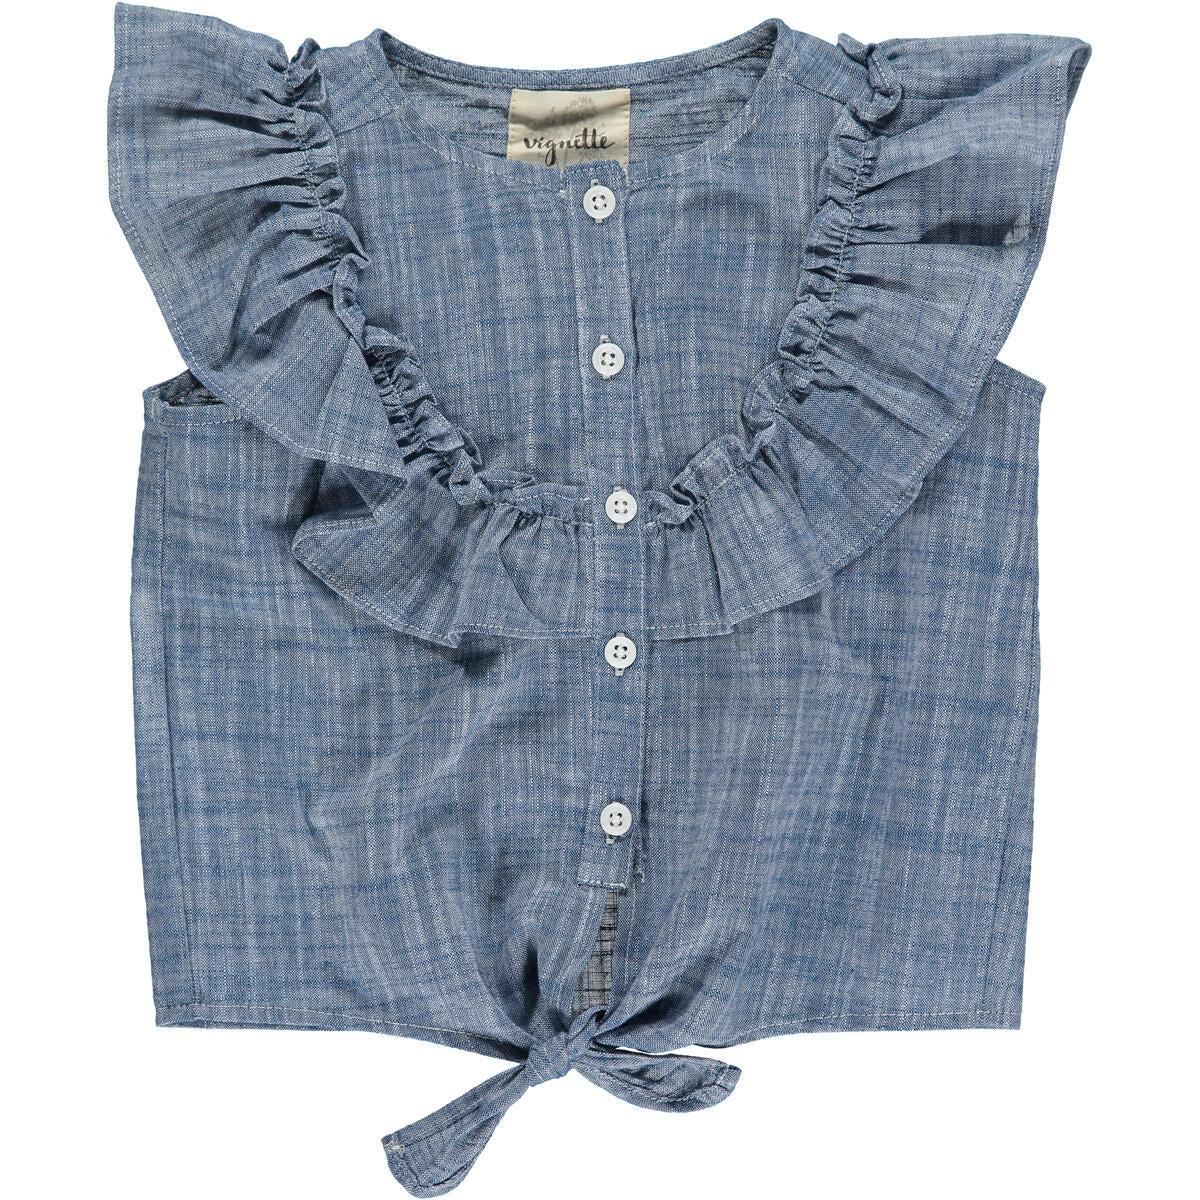 Vignette Luna Frilly Denim Girl's Top - Blue chambray button ruffle top 